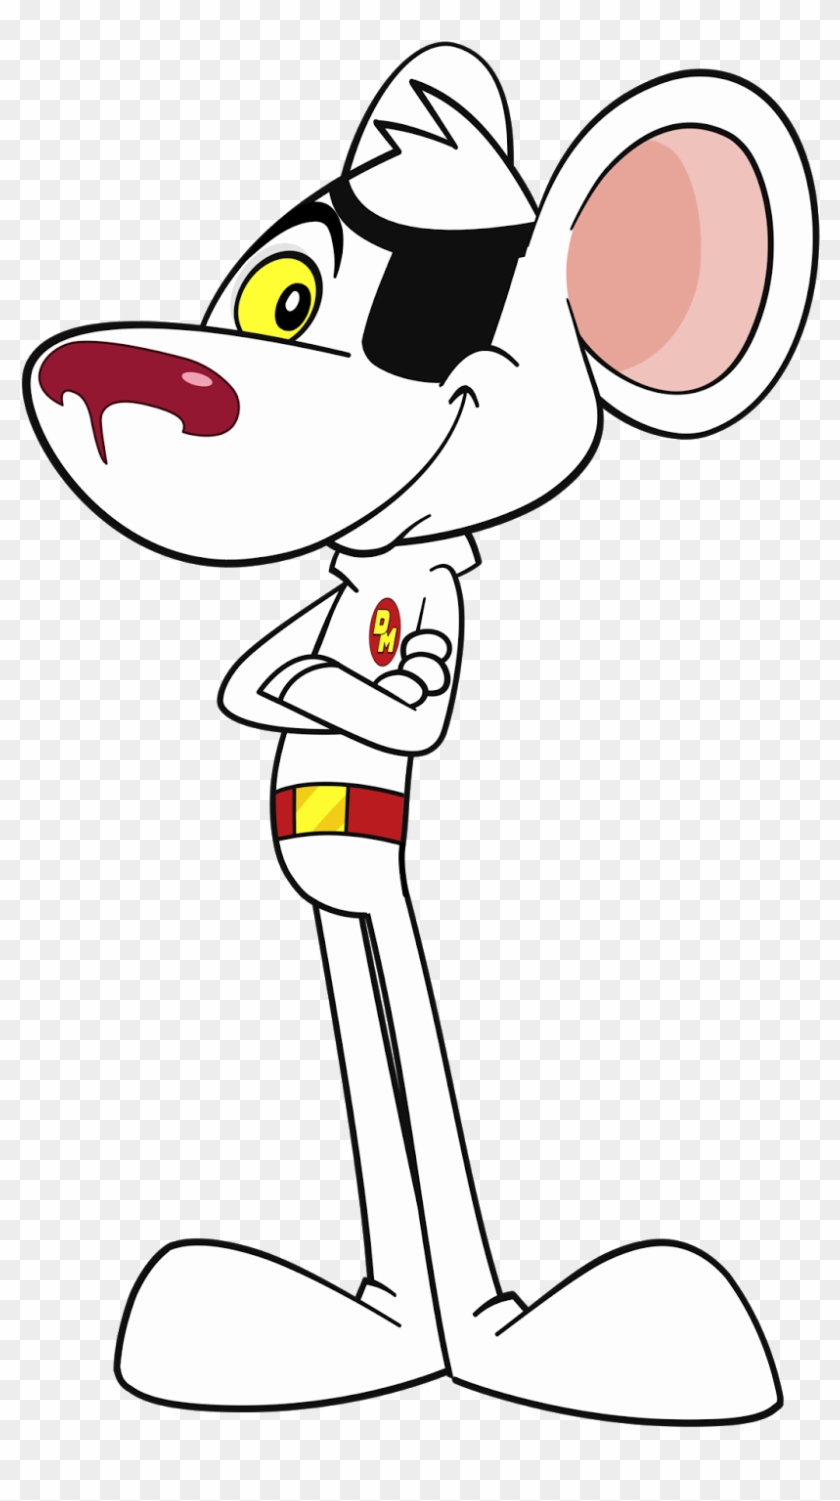 Danger Mouse - Image - Cartoon Network New Shows 2018 #220100